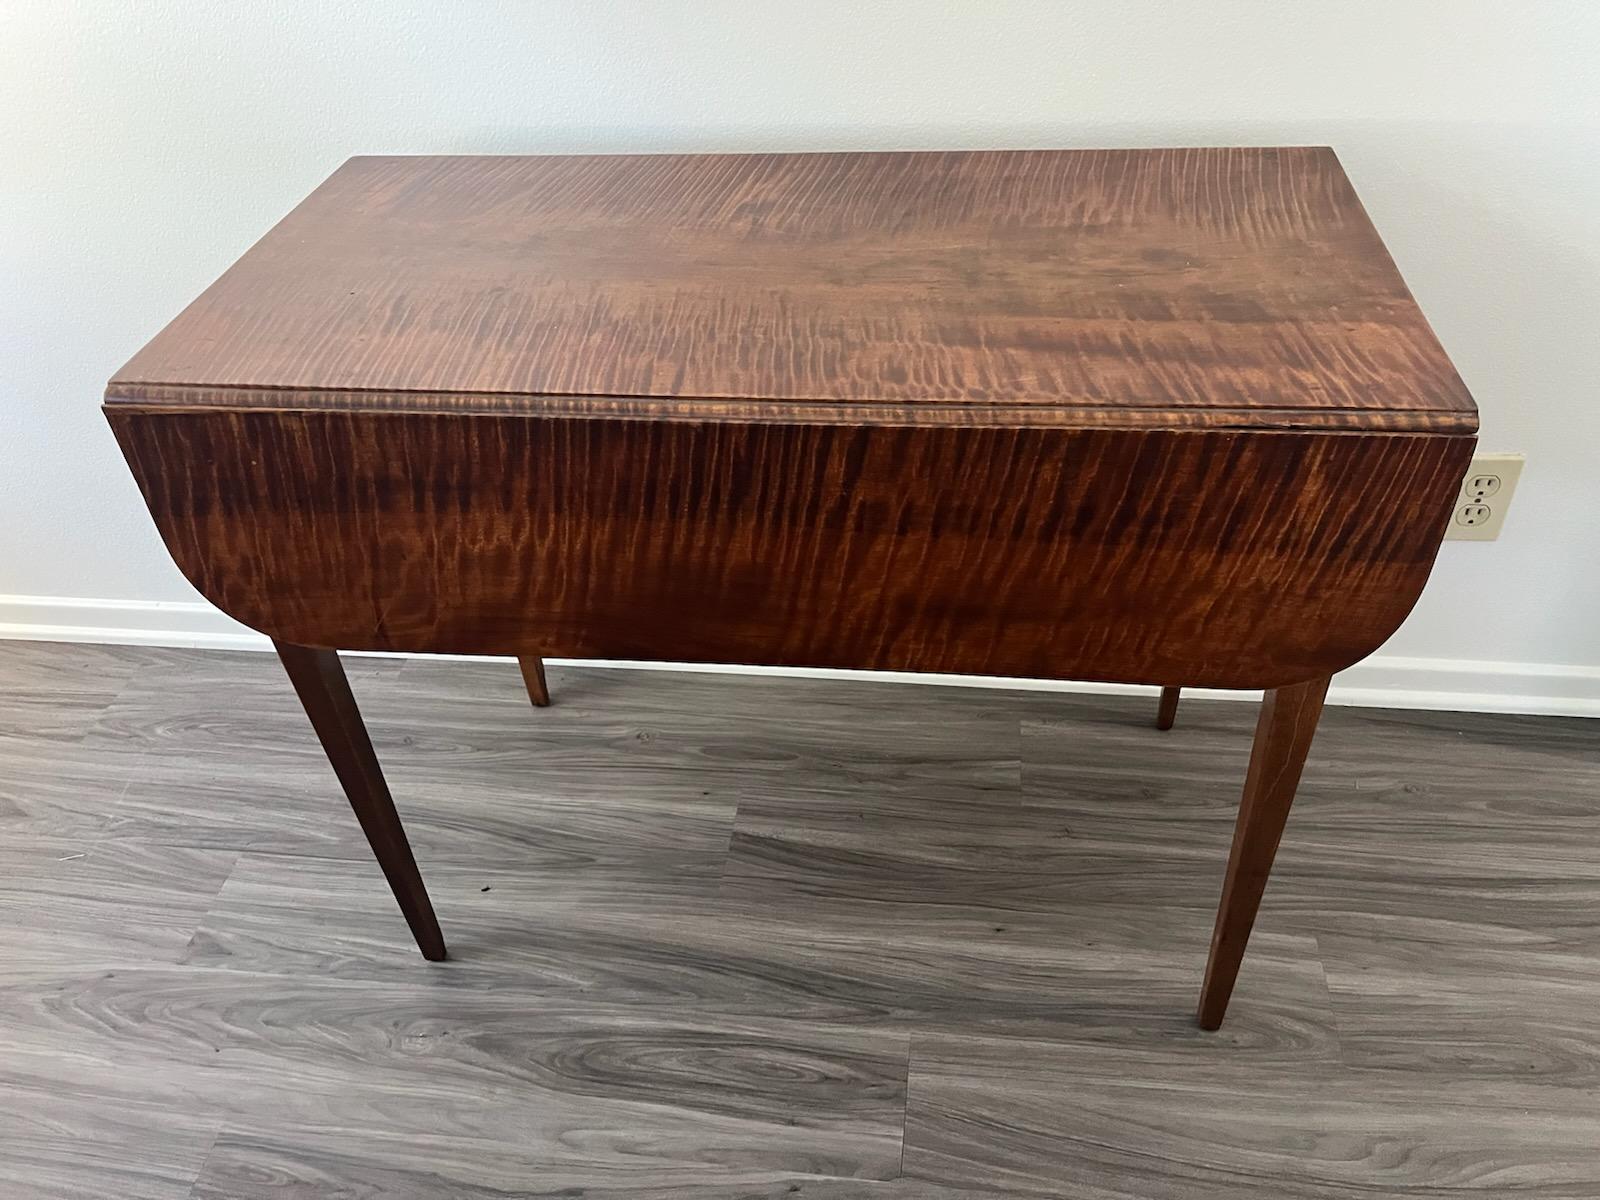 Wood Early 19th C Tiger Eye Drop Leaf Table For Sale